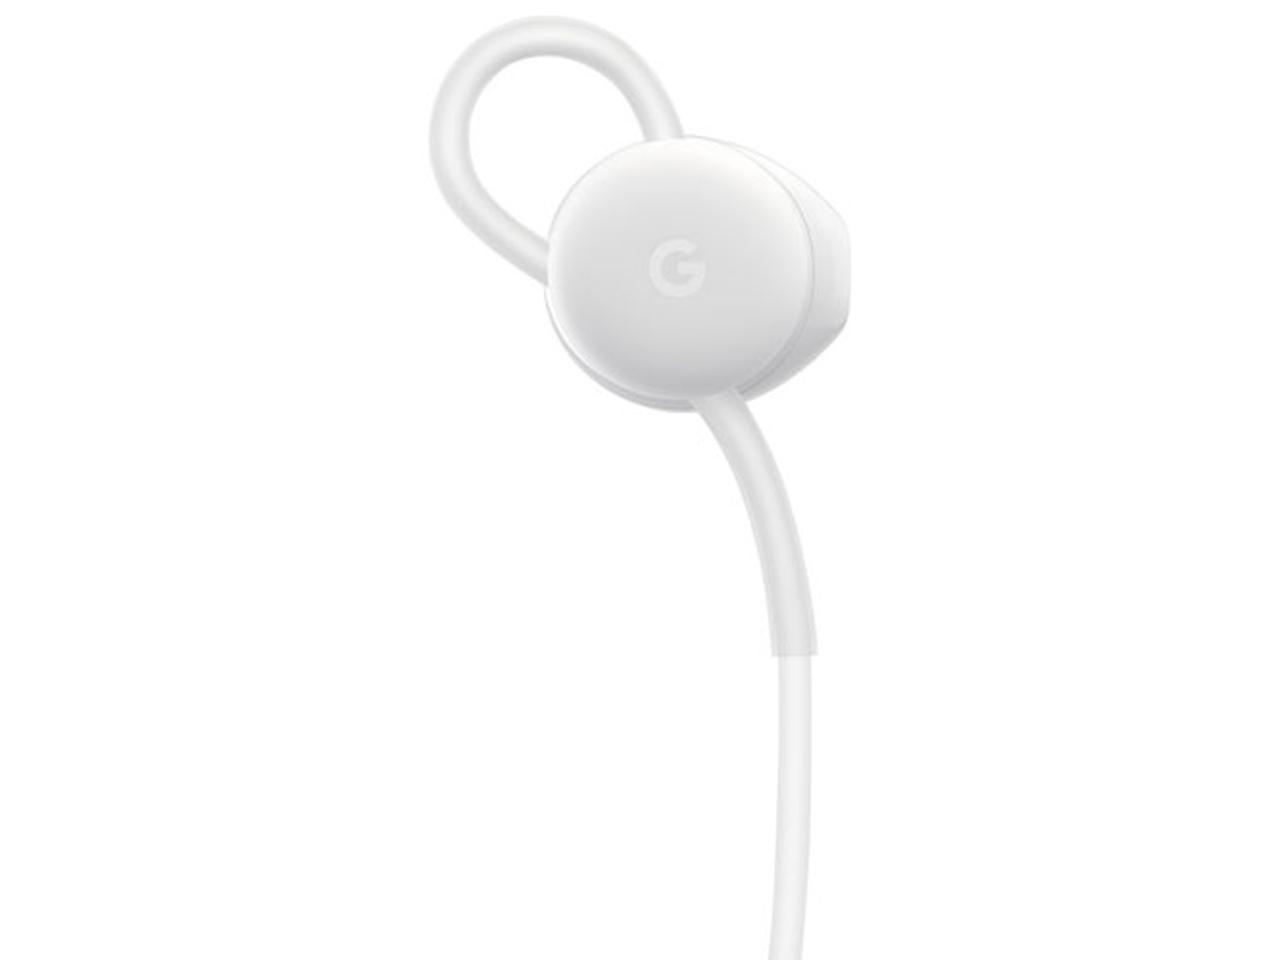 Google Pixel In-Ear Wired Digital Earbuds Headset for USB-C Phones - White